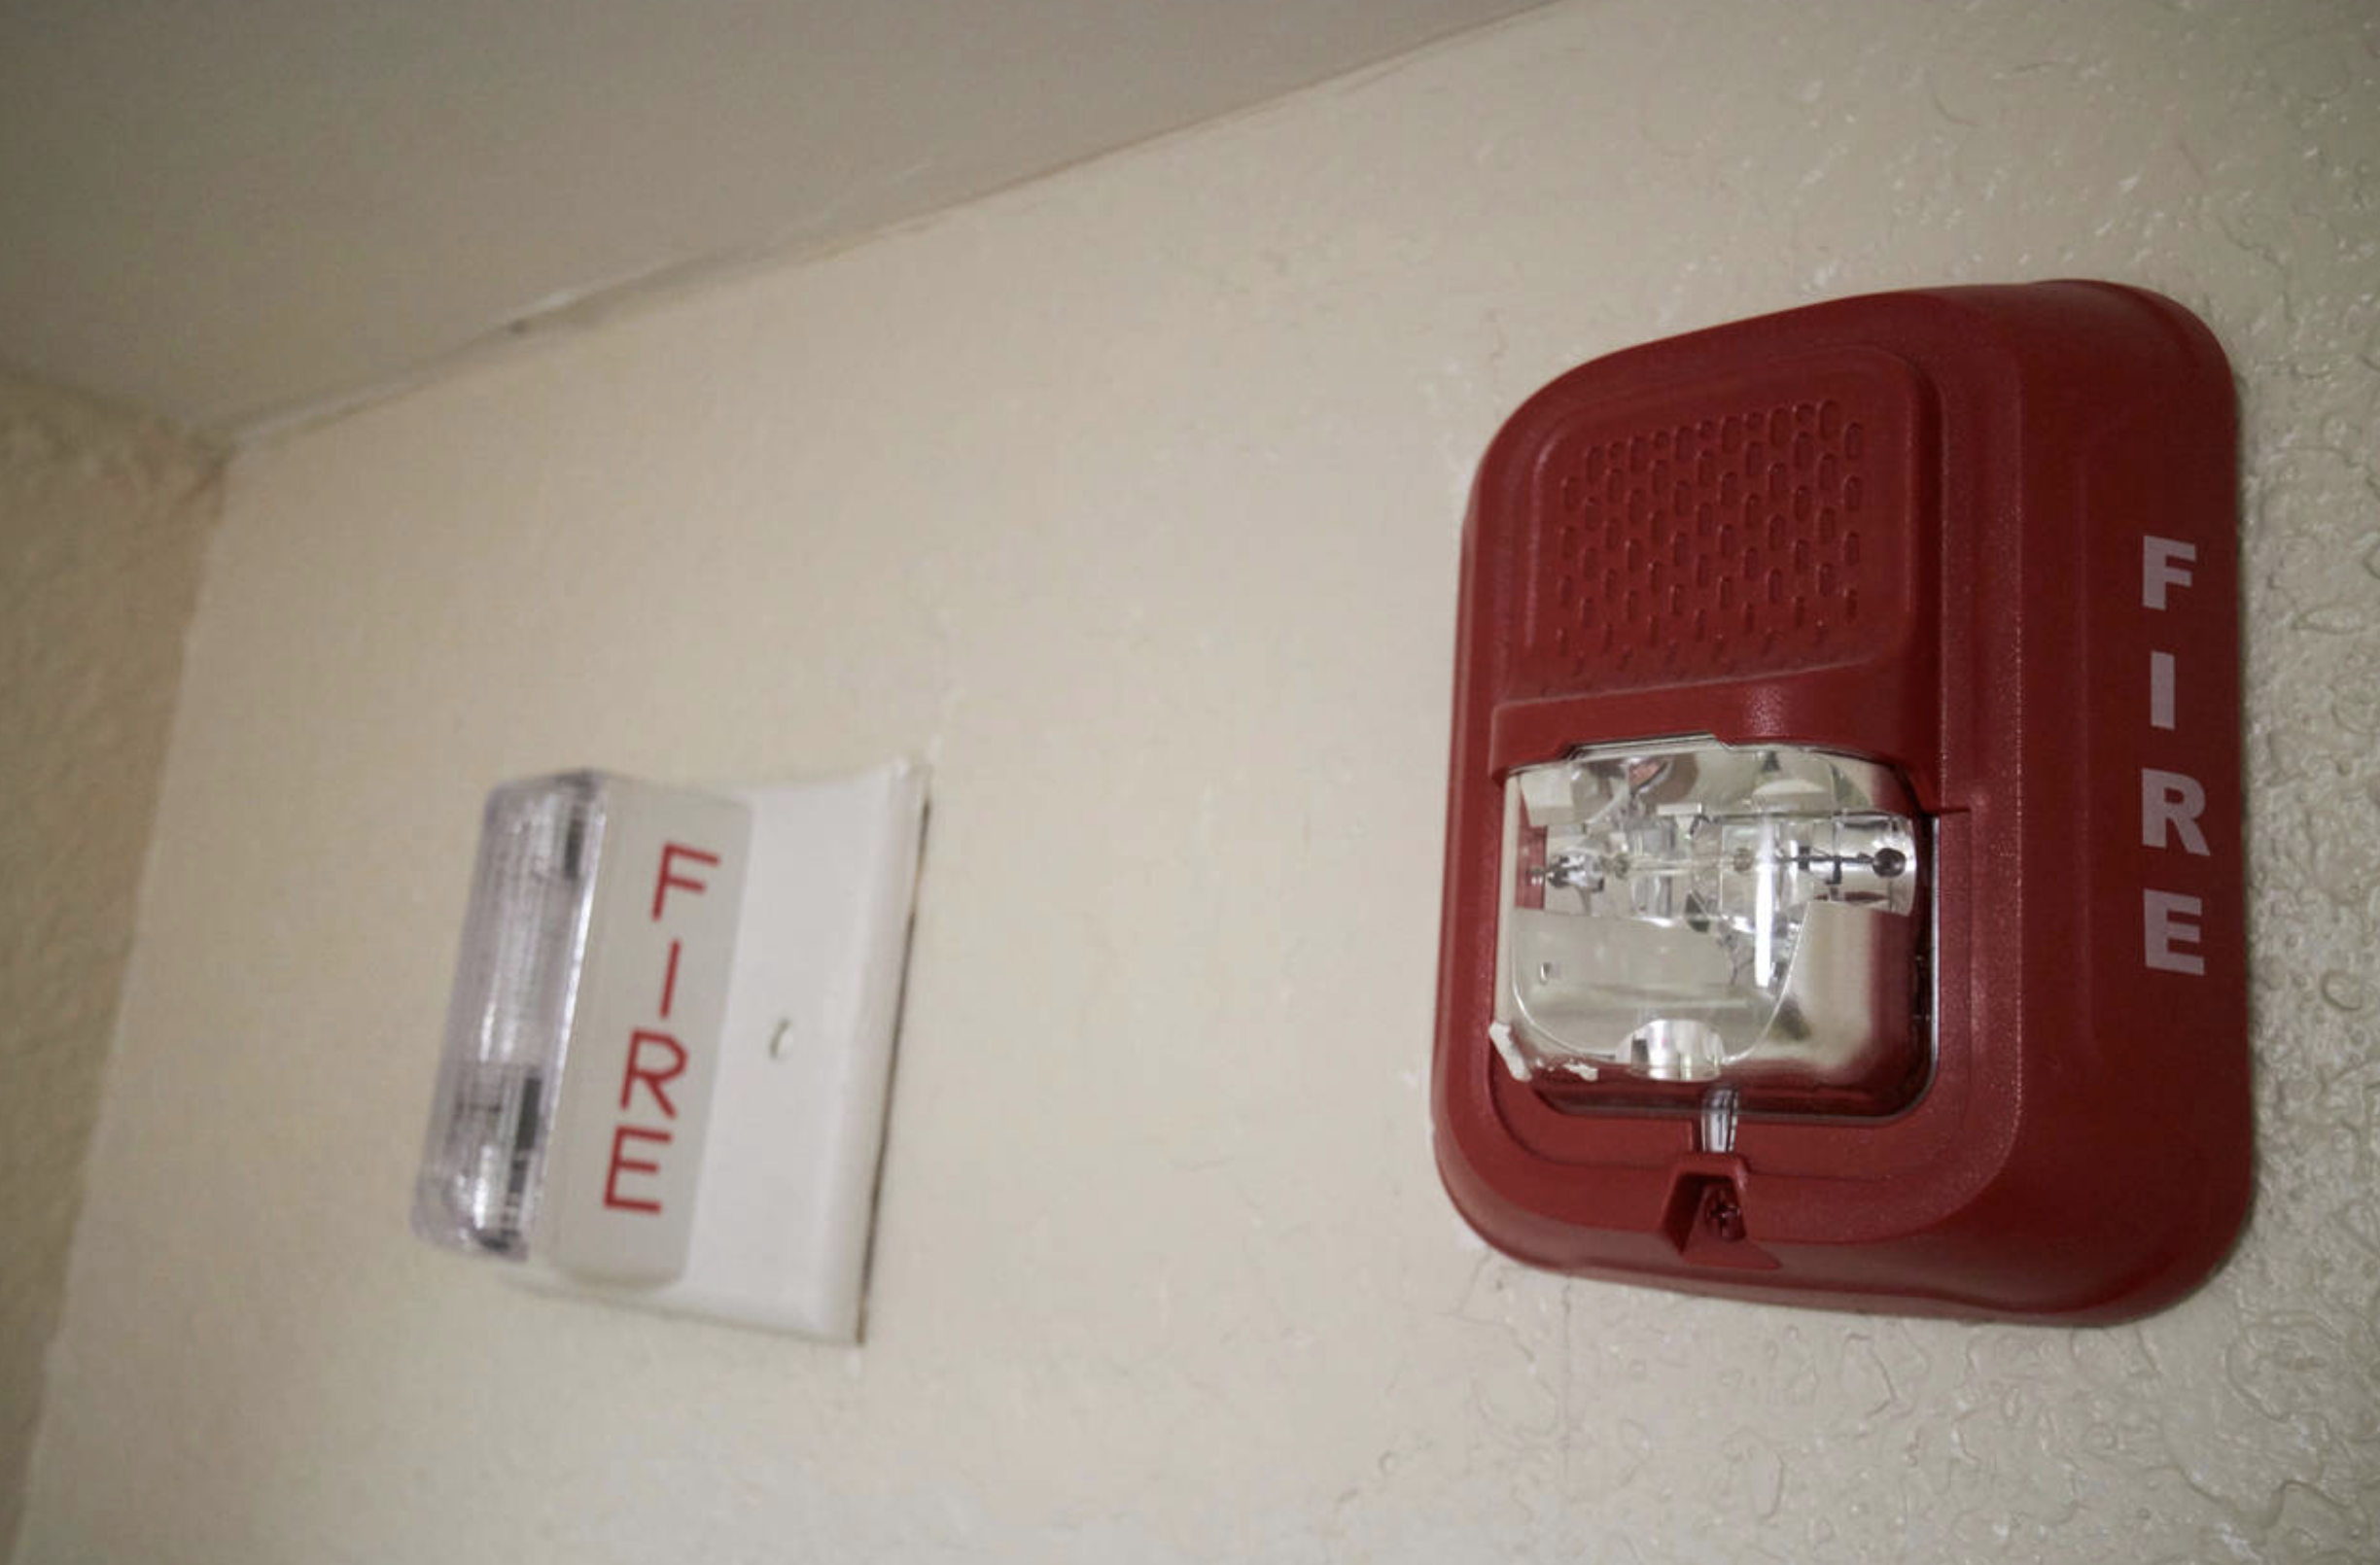 Over 26,000 homes in UAE now have smart fire alarm systems